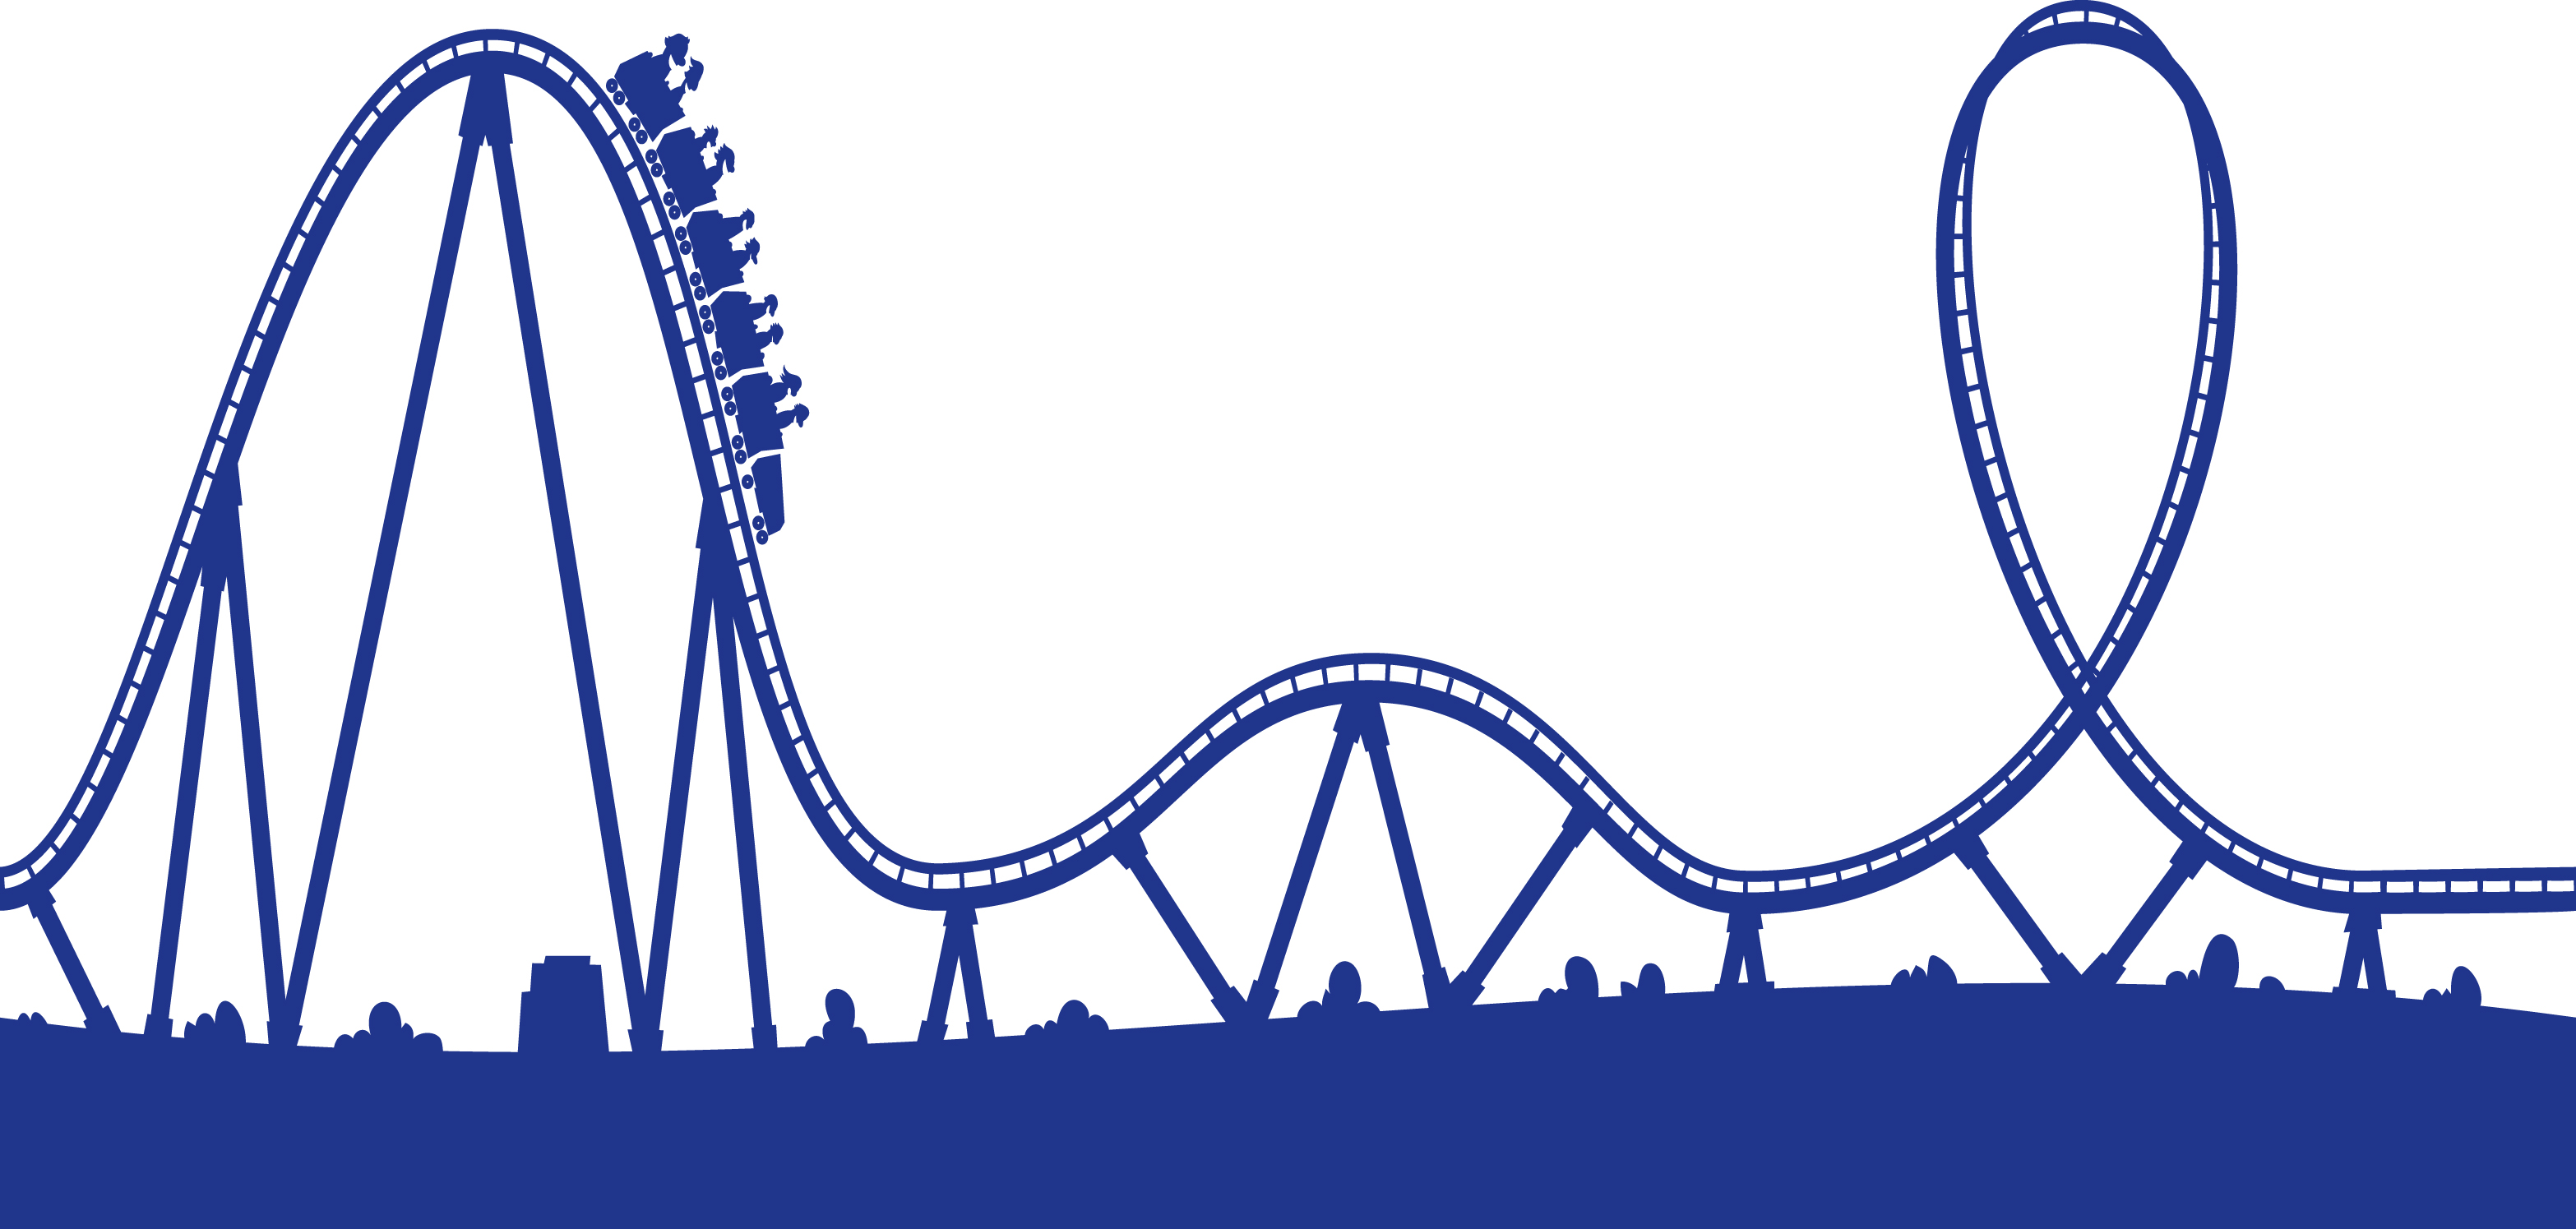 Roller coaster track clipart